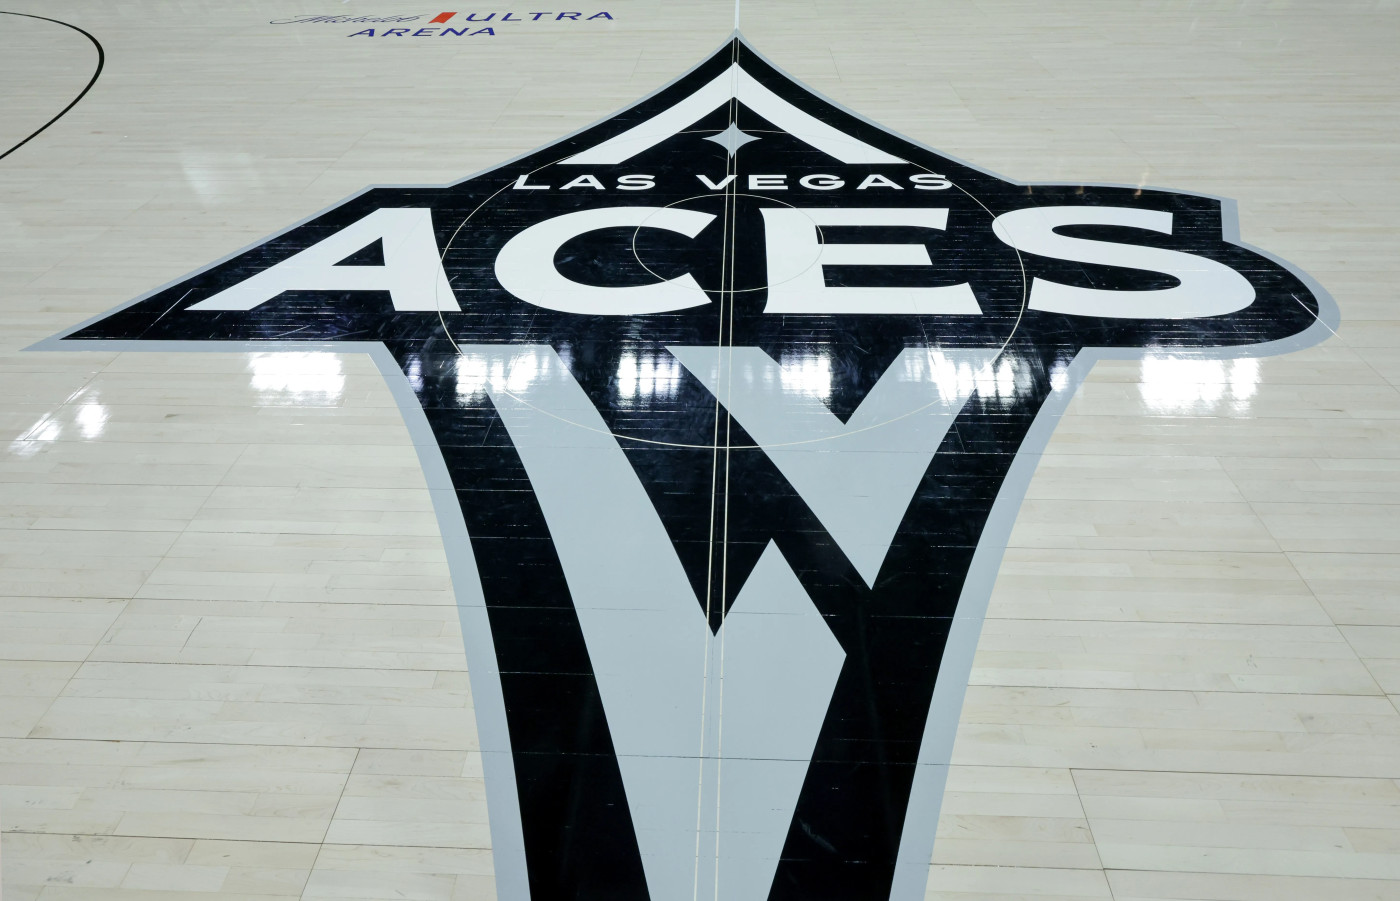 WNBA investigating Las Vegas Aces after every player received $100,000 in sponsorship